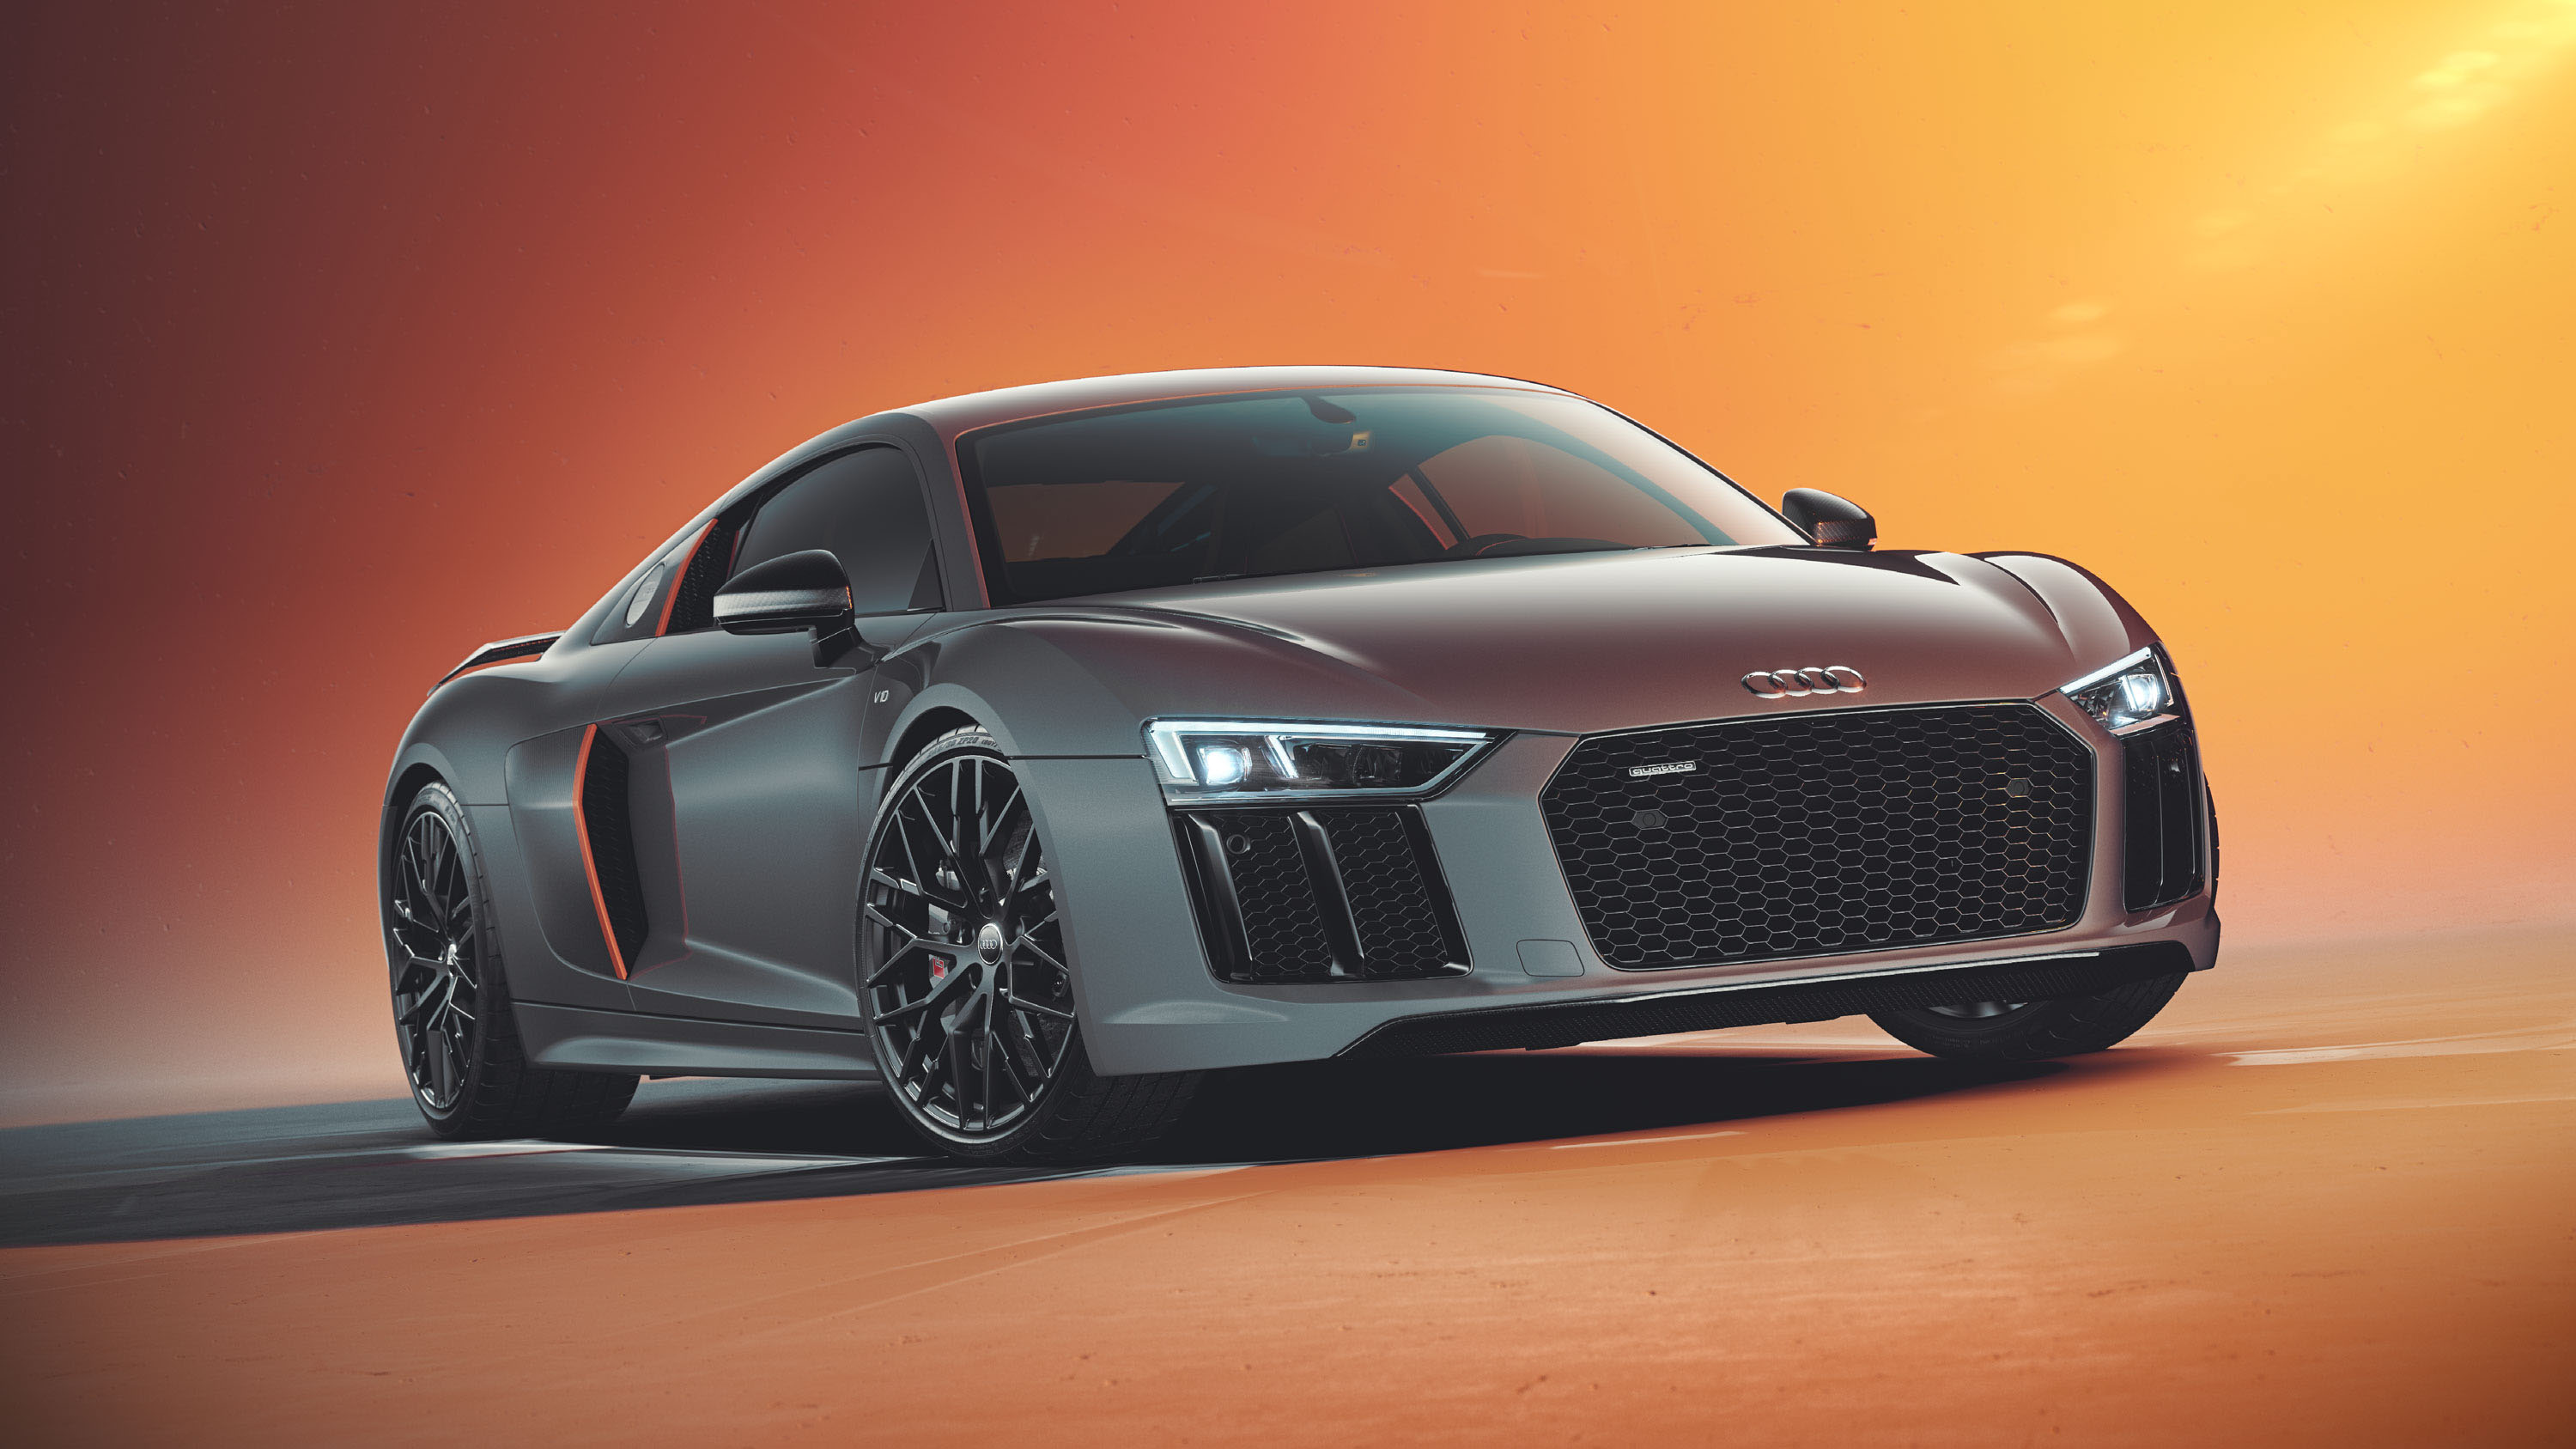 1366x768 Audi R8 V10 Car 1366x768 Resolution Hd 4k Wallpapers Images Backgrounds Photos And Pictures